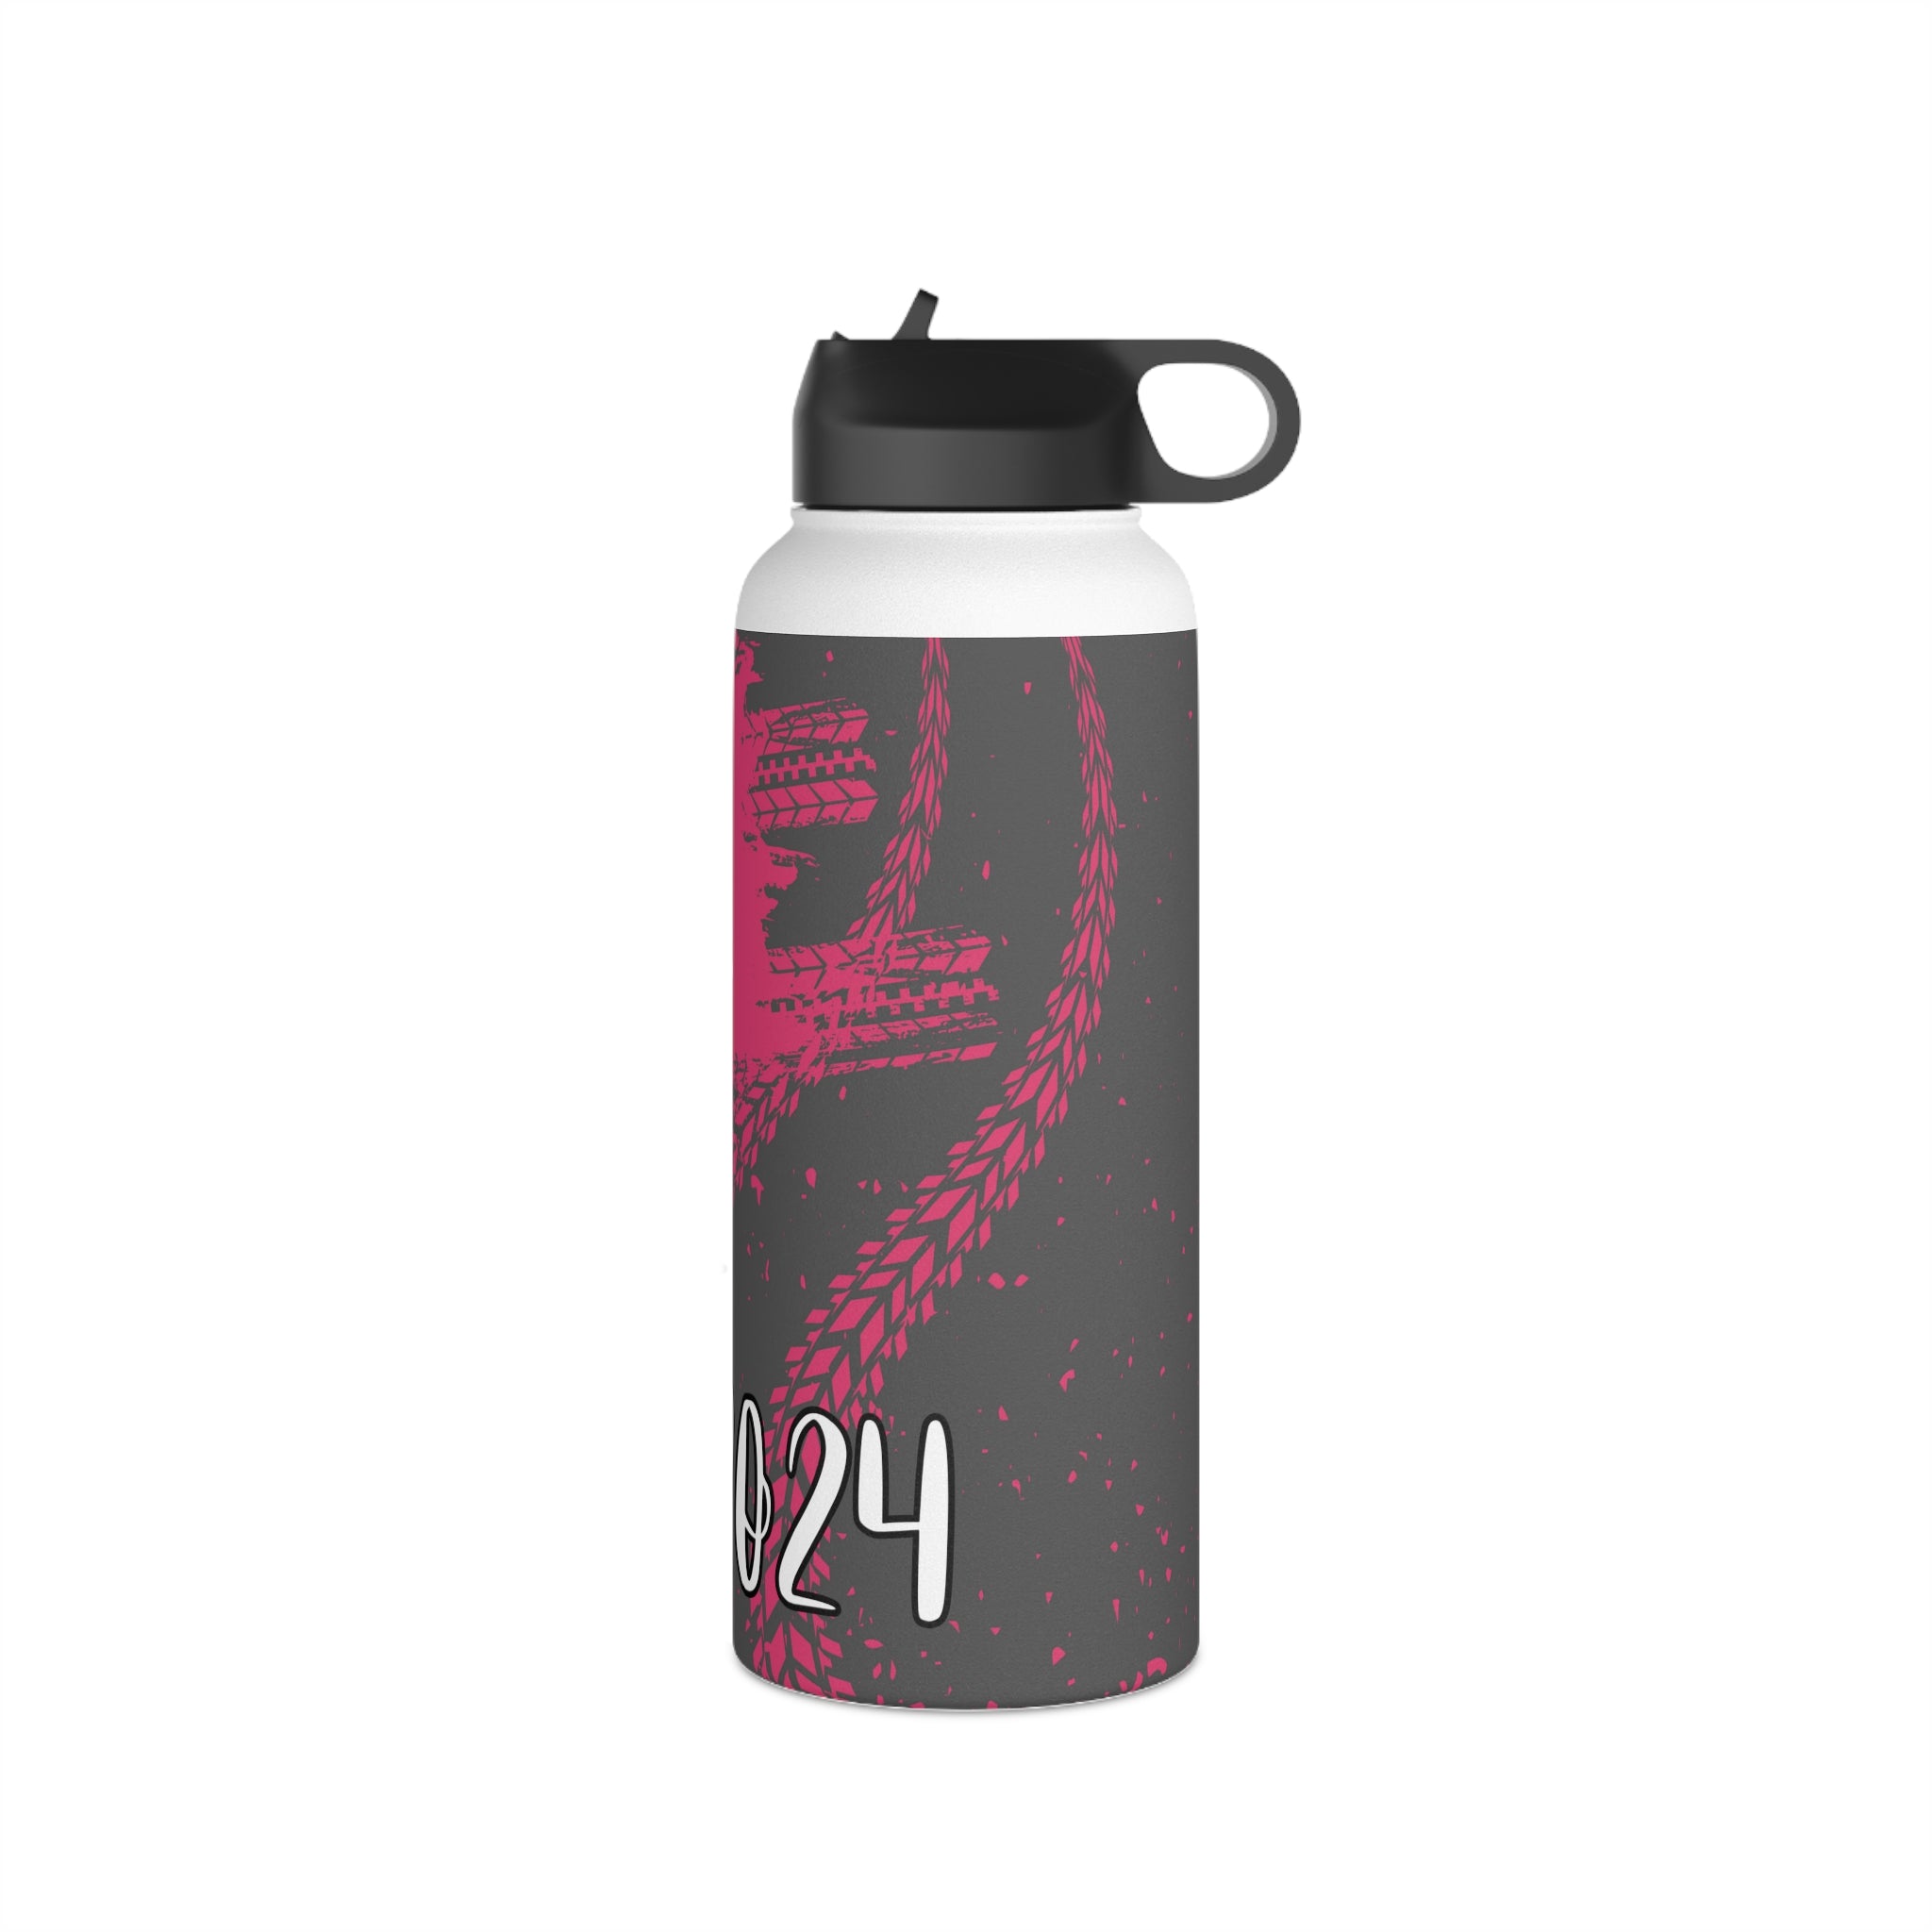 Drive Stainless Steel Water Bottle